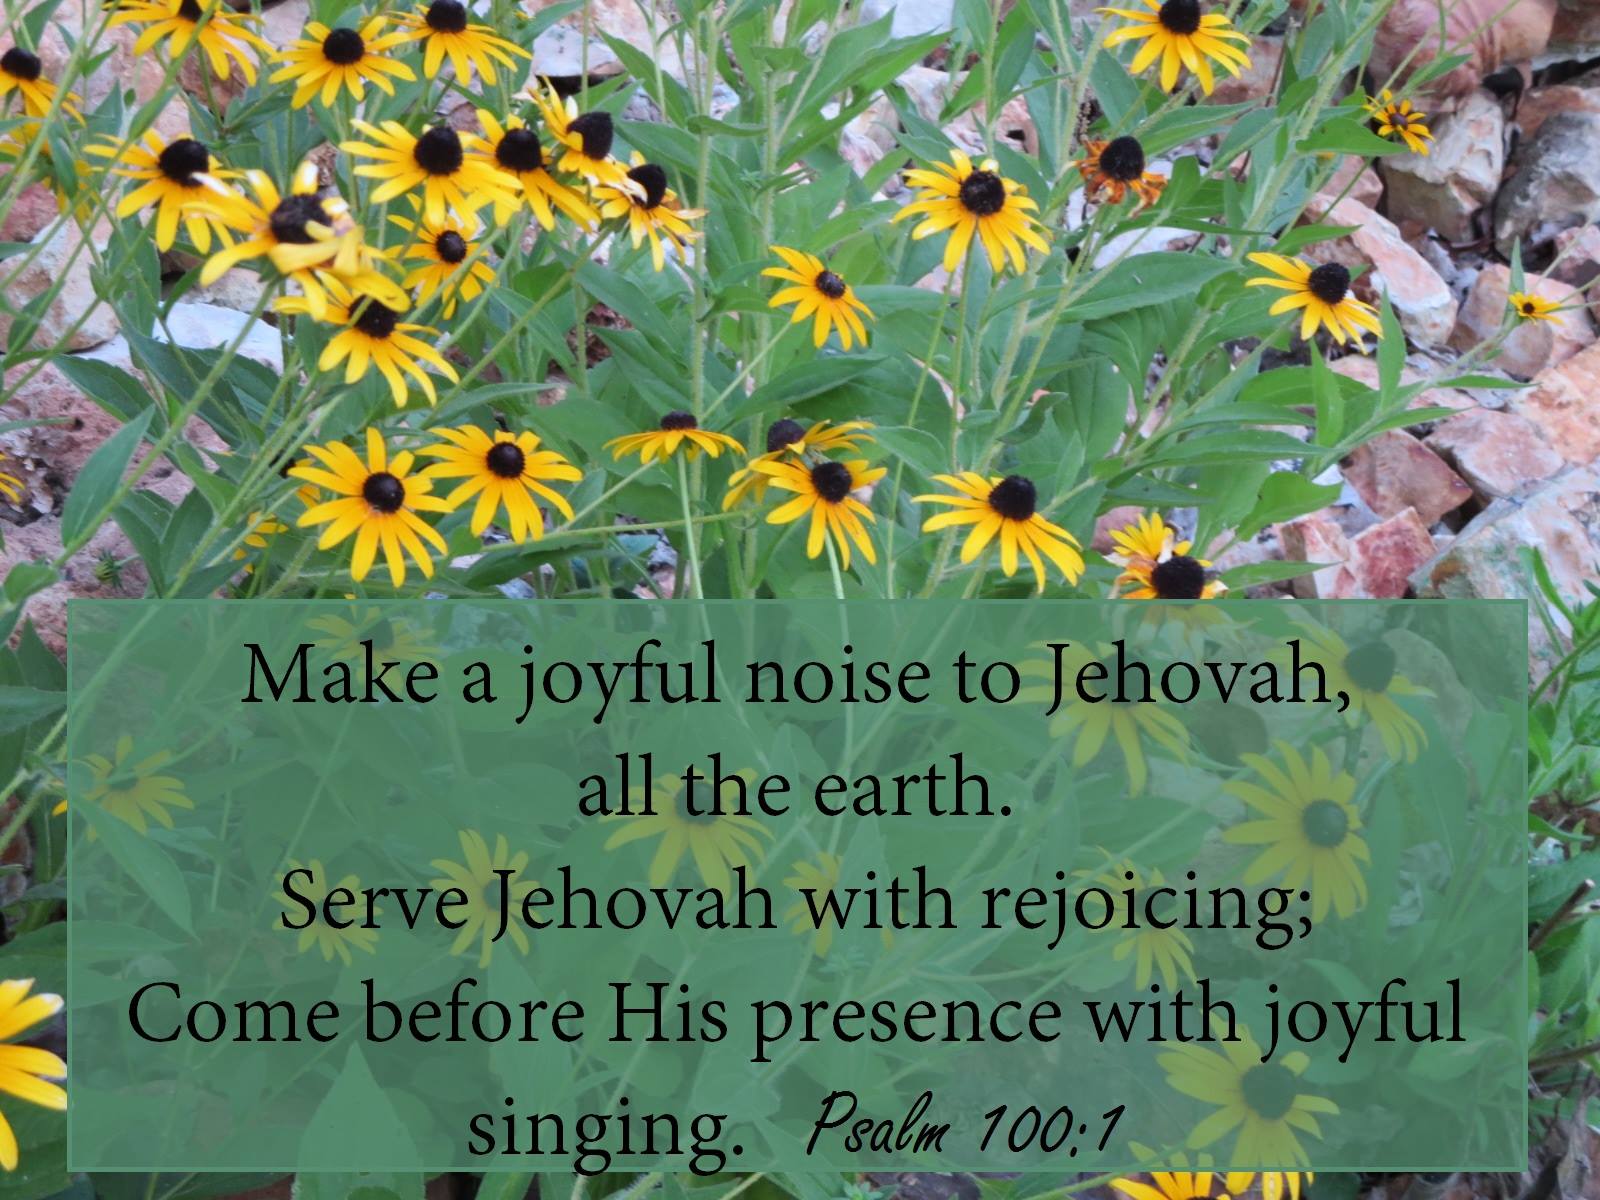 Psalm 100:1-2 Make a joyful noise to Jehovah, all the earth. Serve Jehovah with rejoicing; Come before His presence with joyful singing.